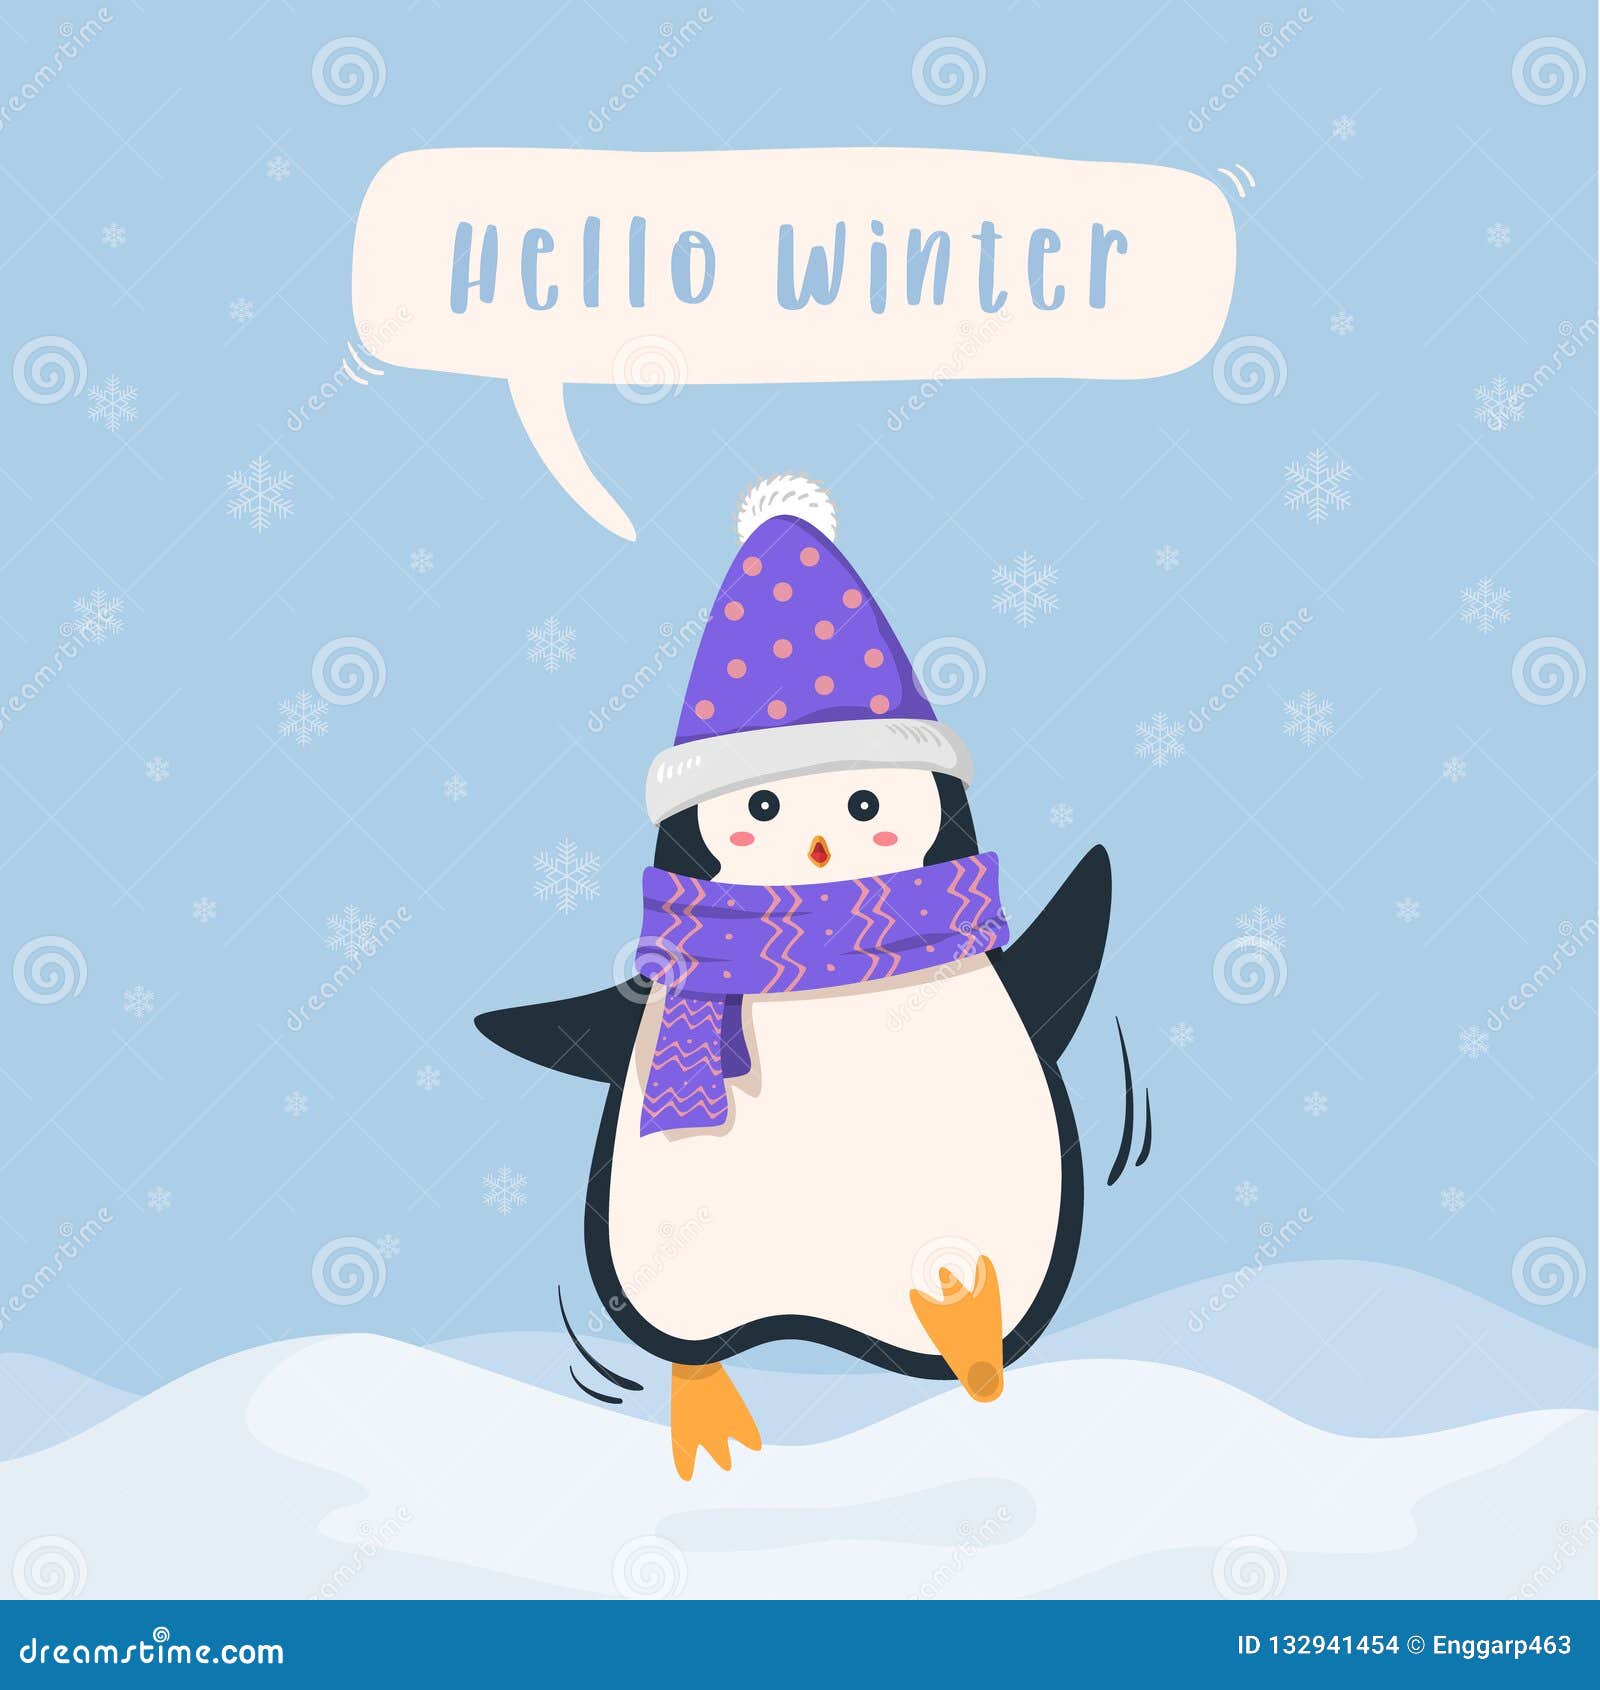 https://thumbs.dreamstime.com/z/winter-holiday-cute-penguin-background-cartoon-wearing-scarf-snow-hats-cheerfully-say-hello-landscape-scene-vector-132941454.jpg